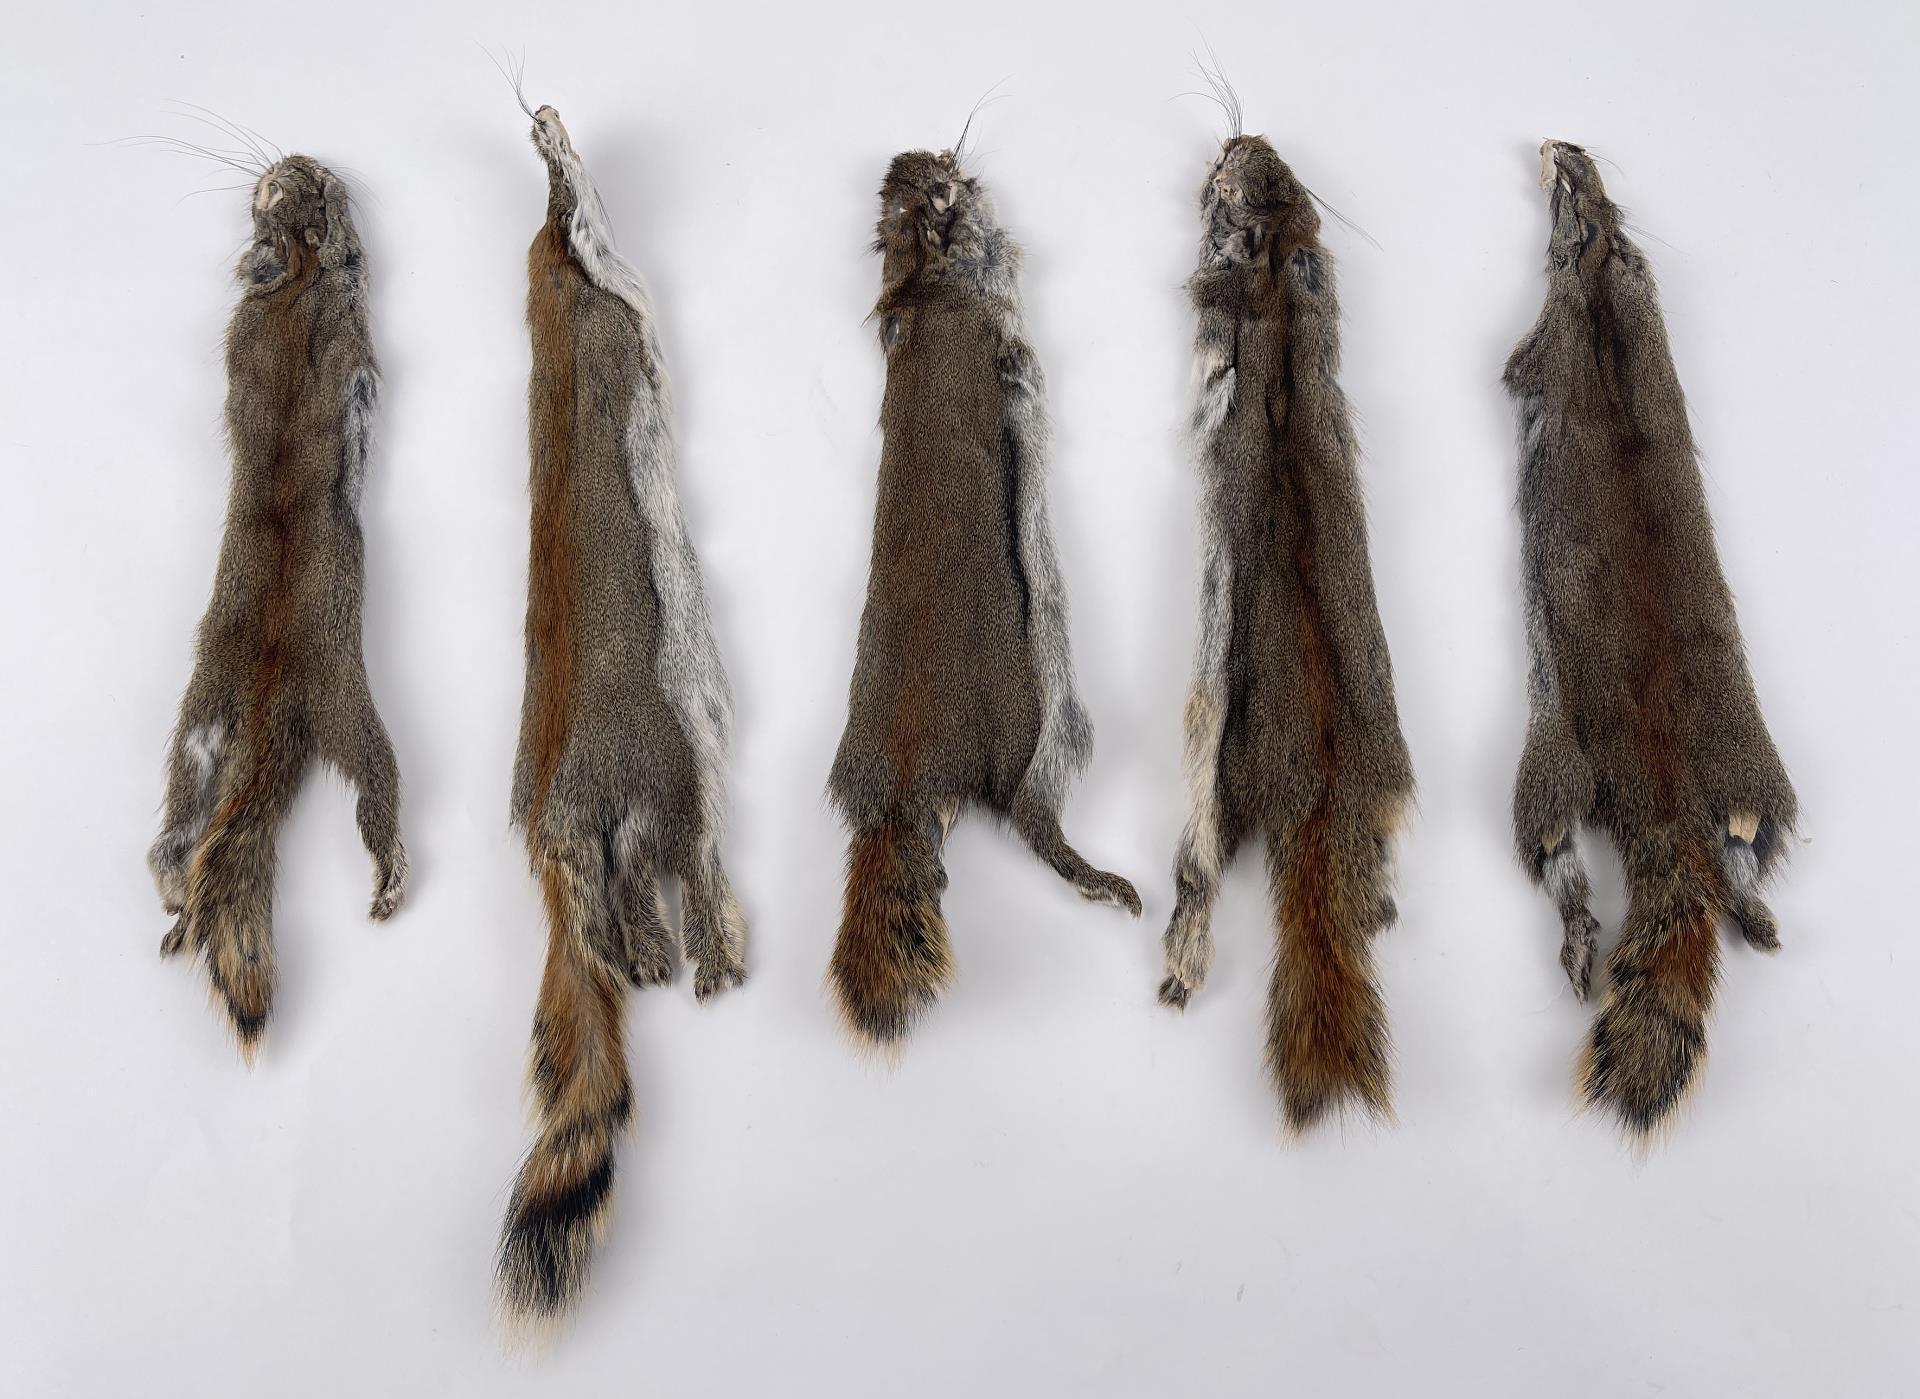 Lot Of 5 Wild Tanned Taxidermy Squirrel